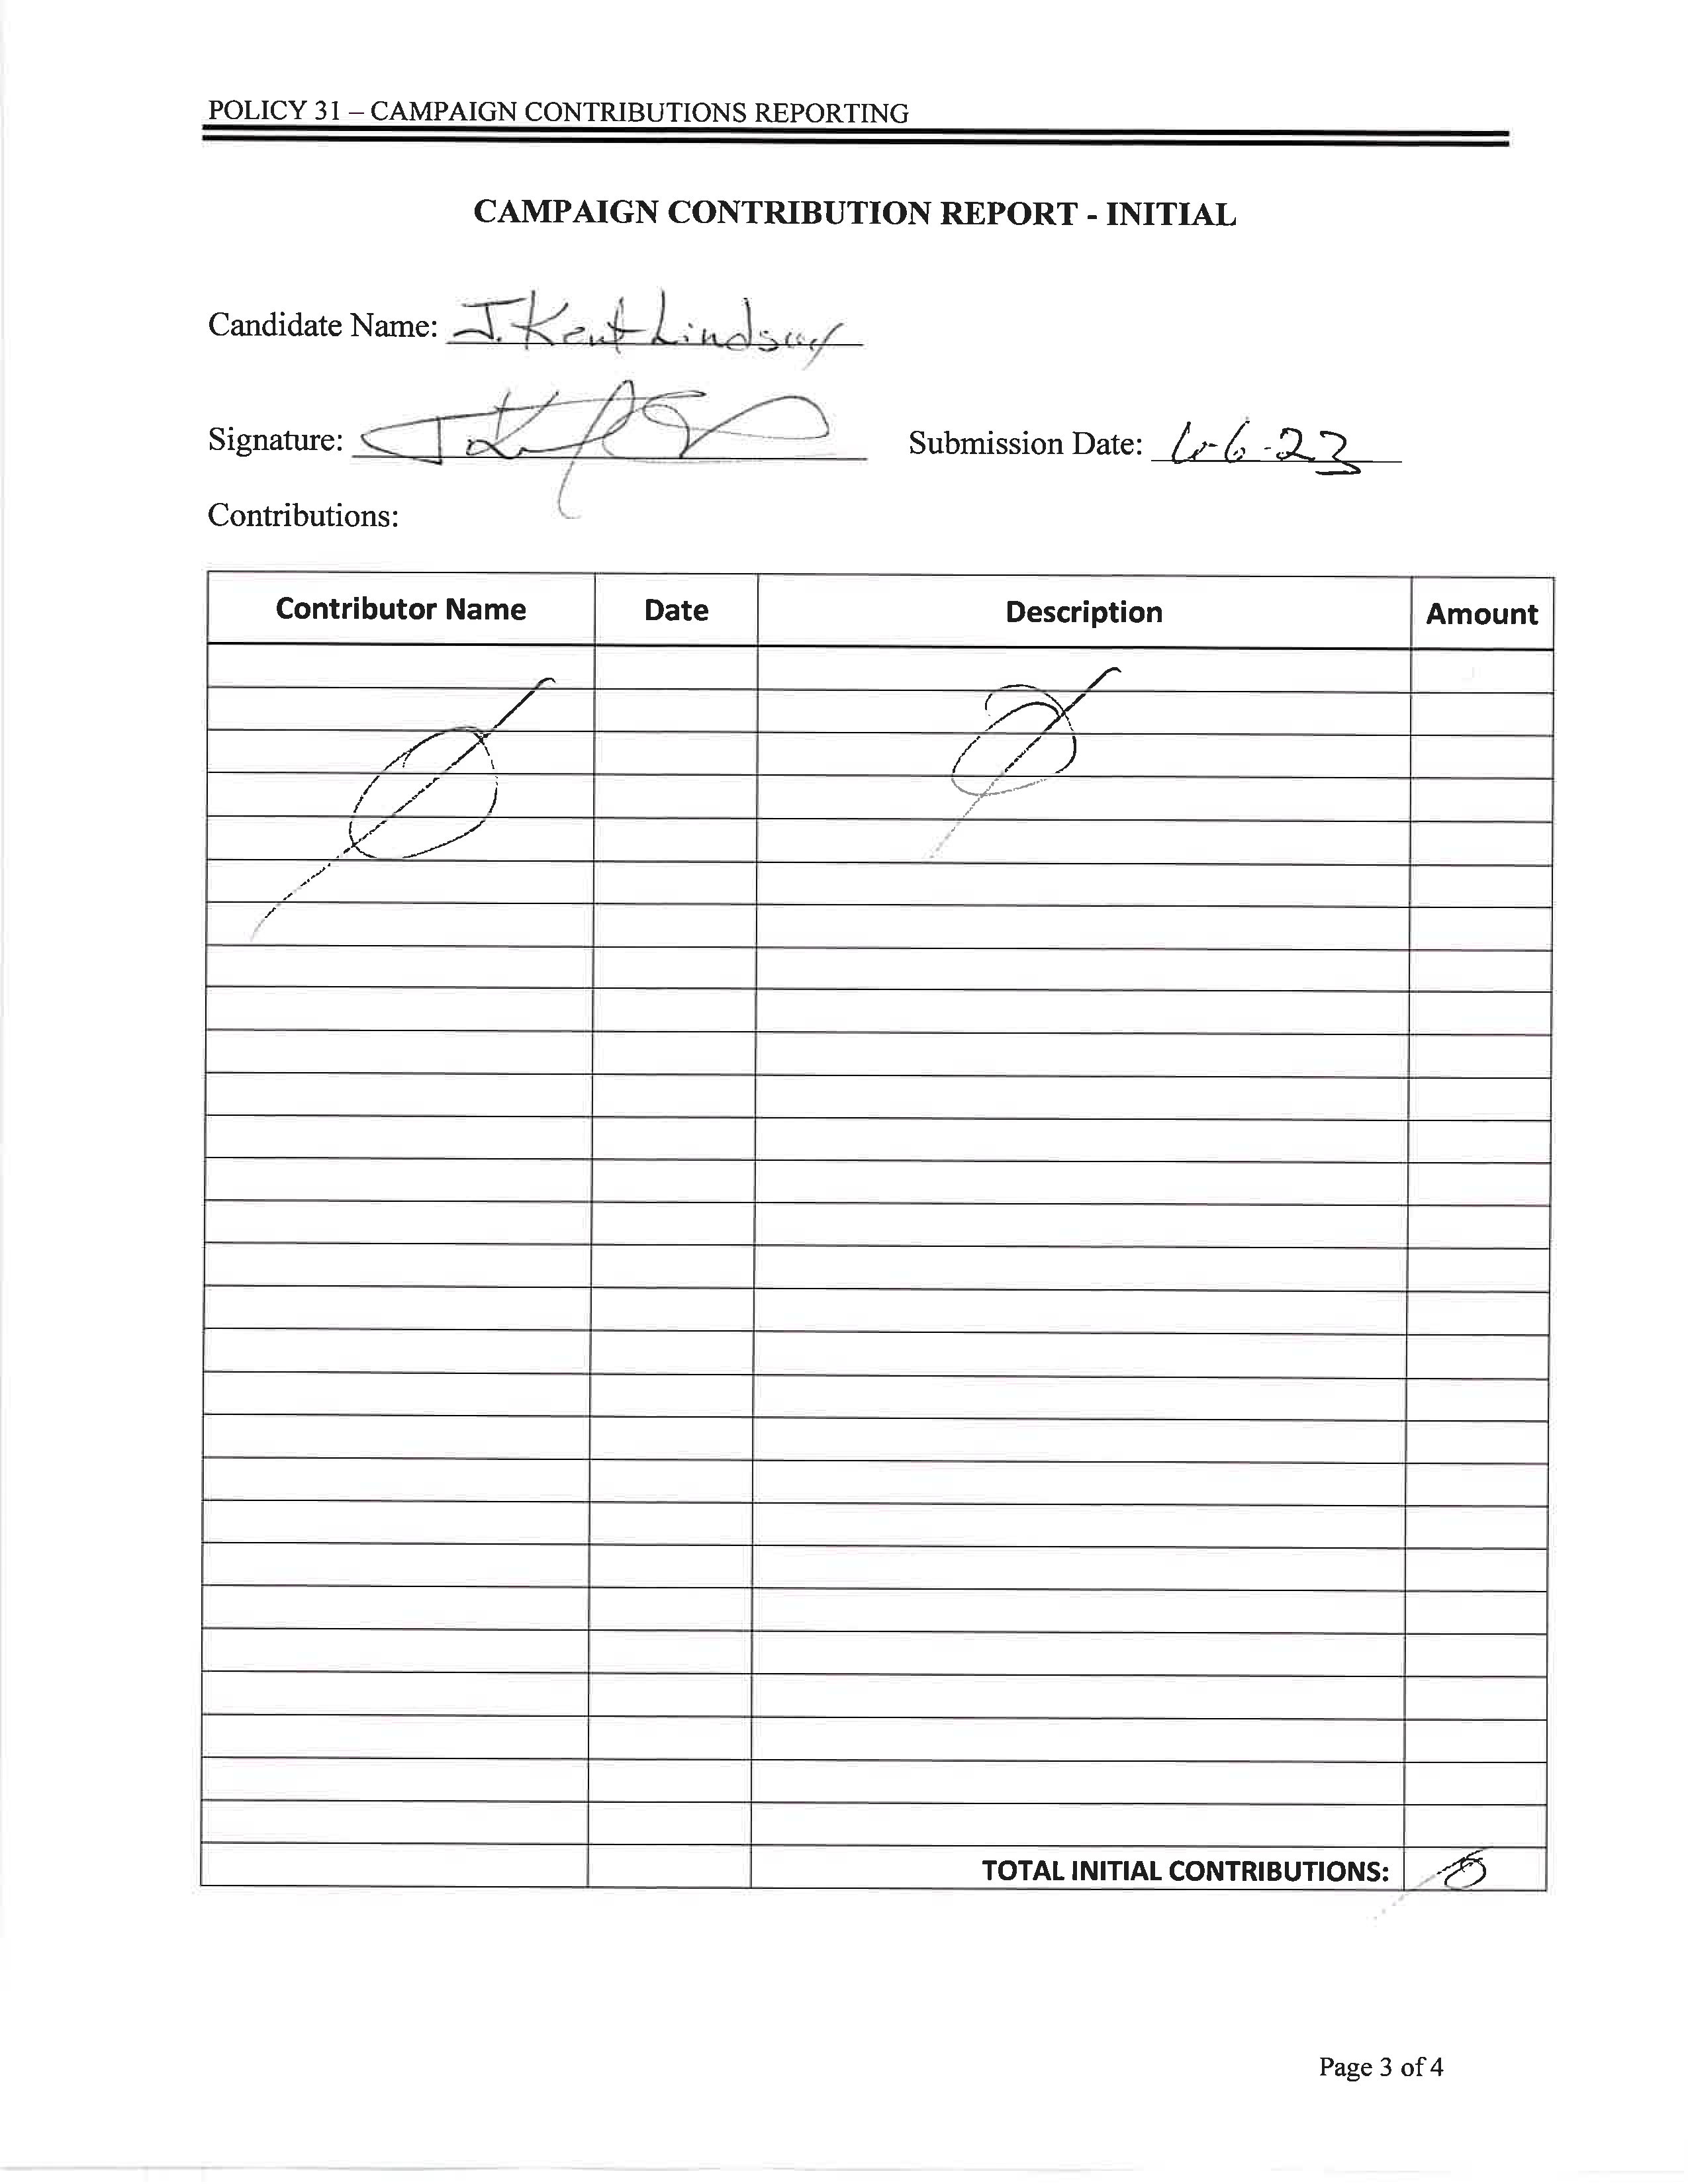 Kent Lindsay Initial Campaign Contribution Report